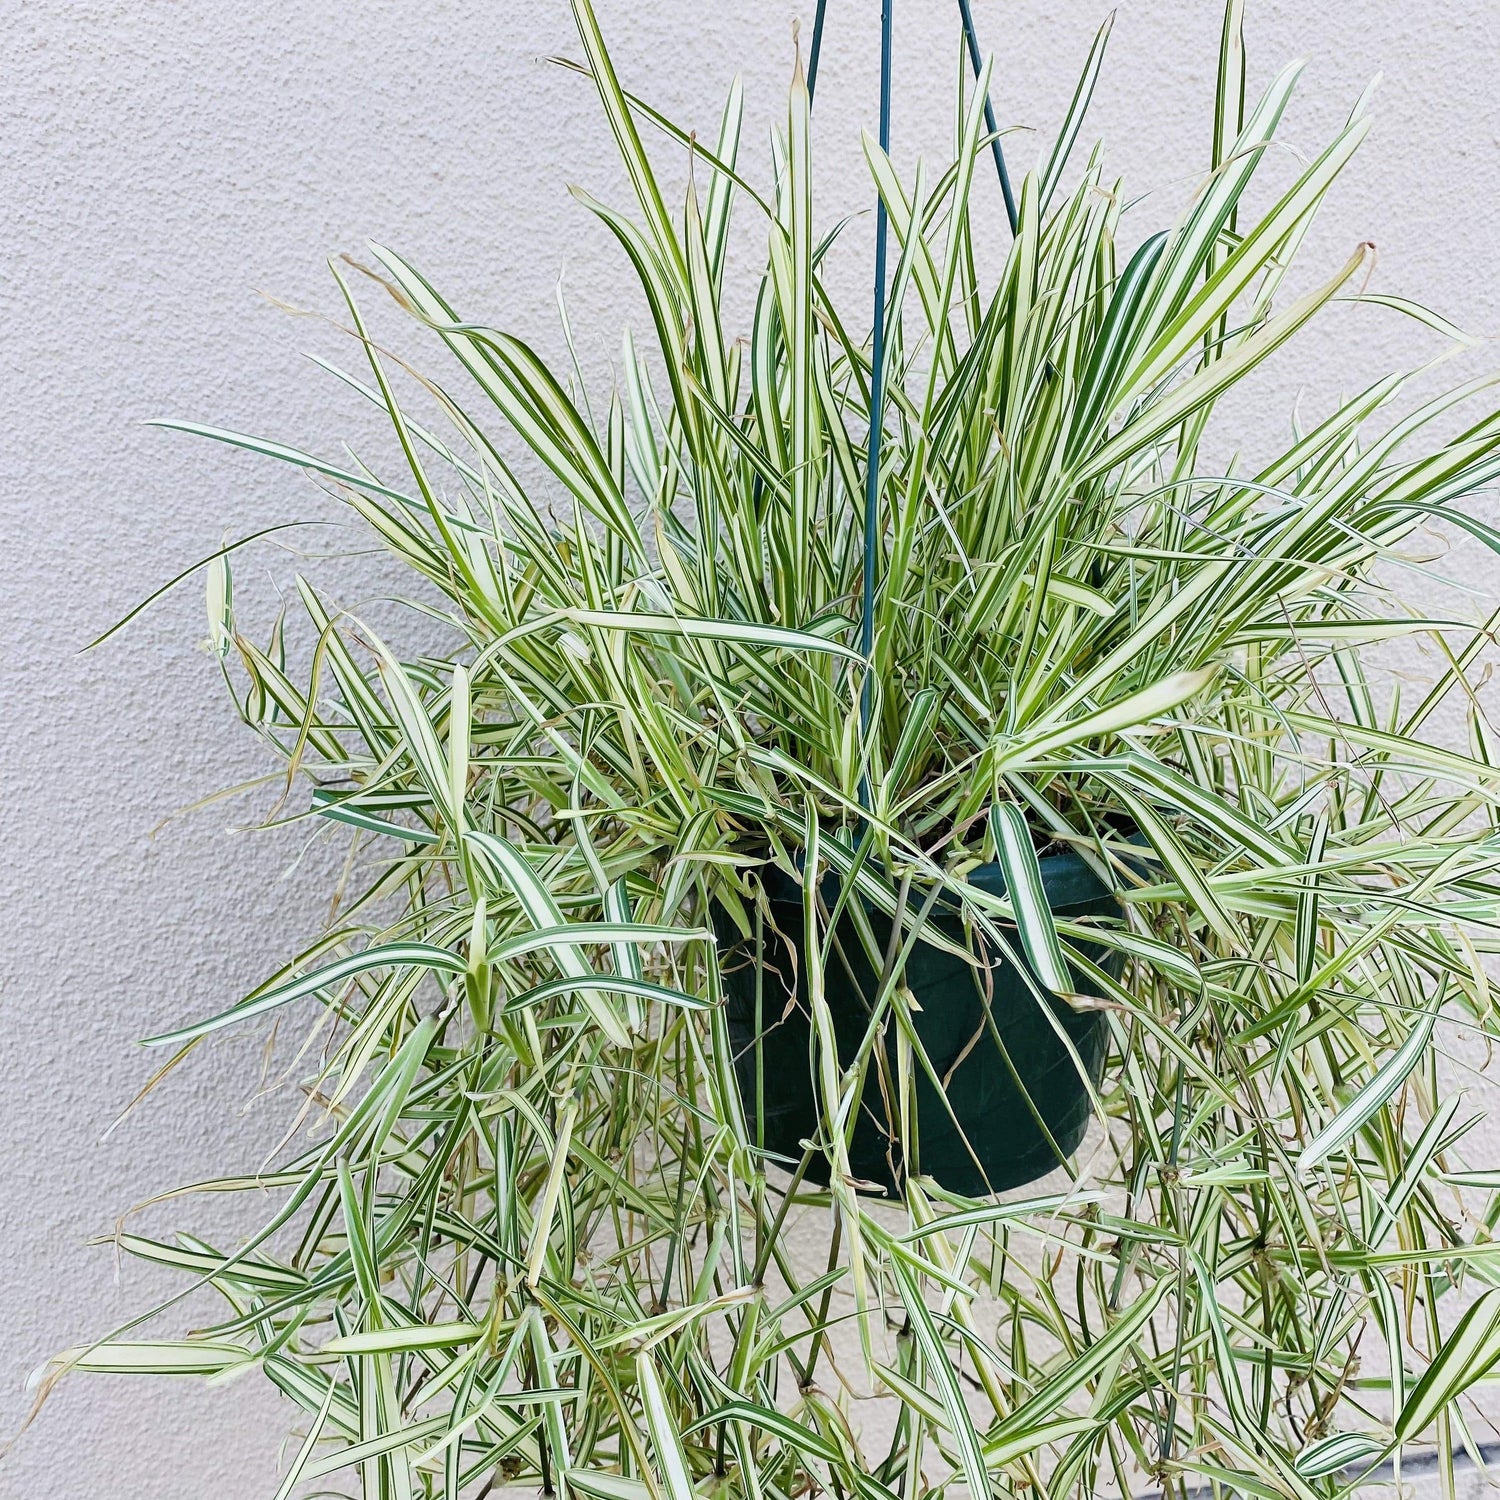 Urban Sprouts 8" in nursery pot Forest Grass 'Golden Japanese'